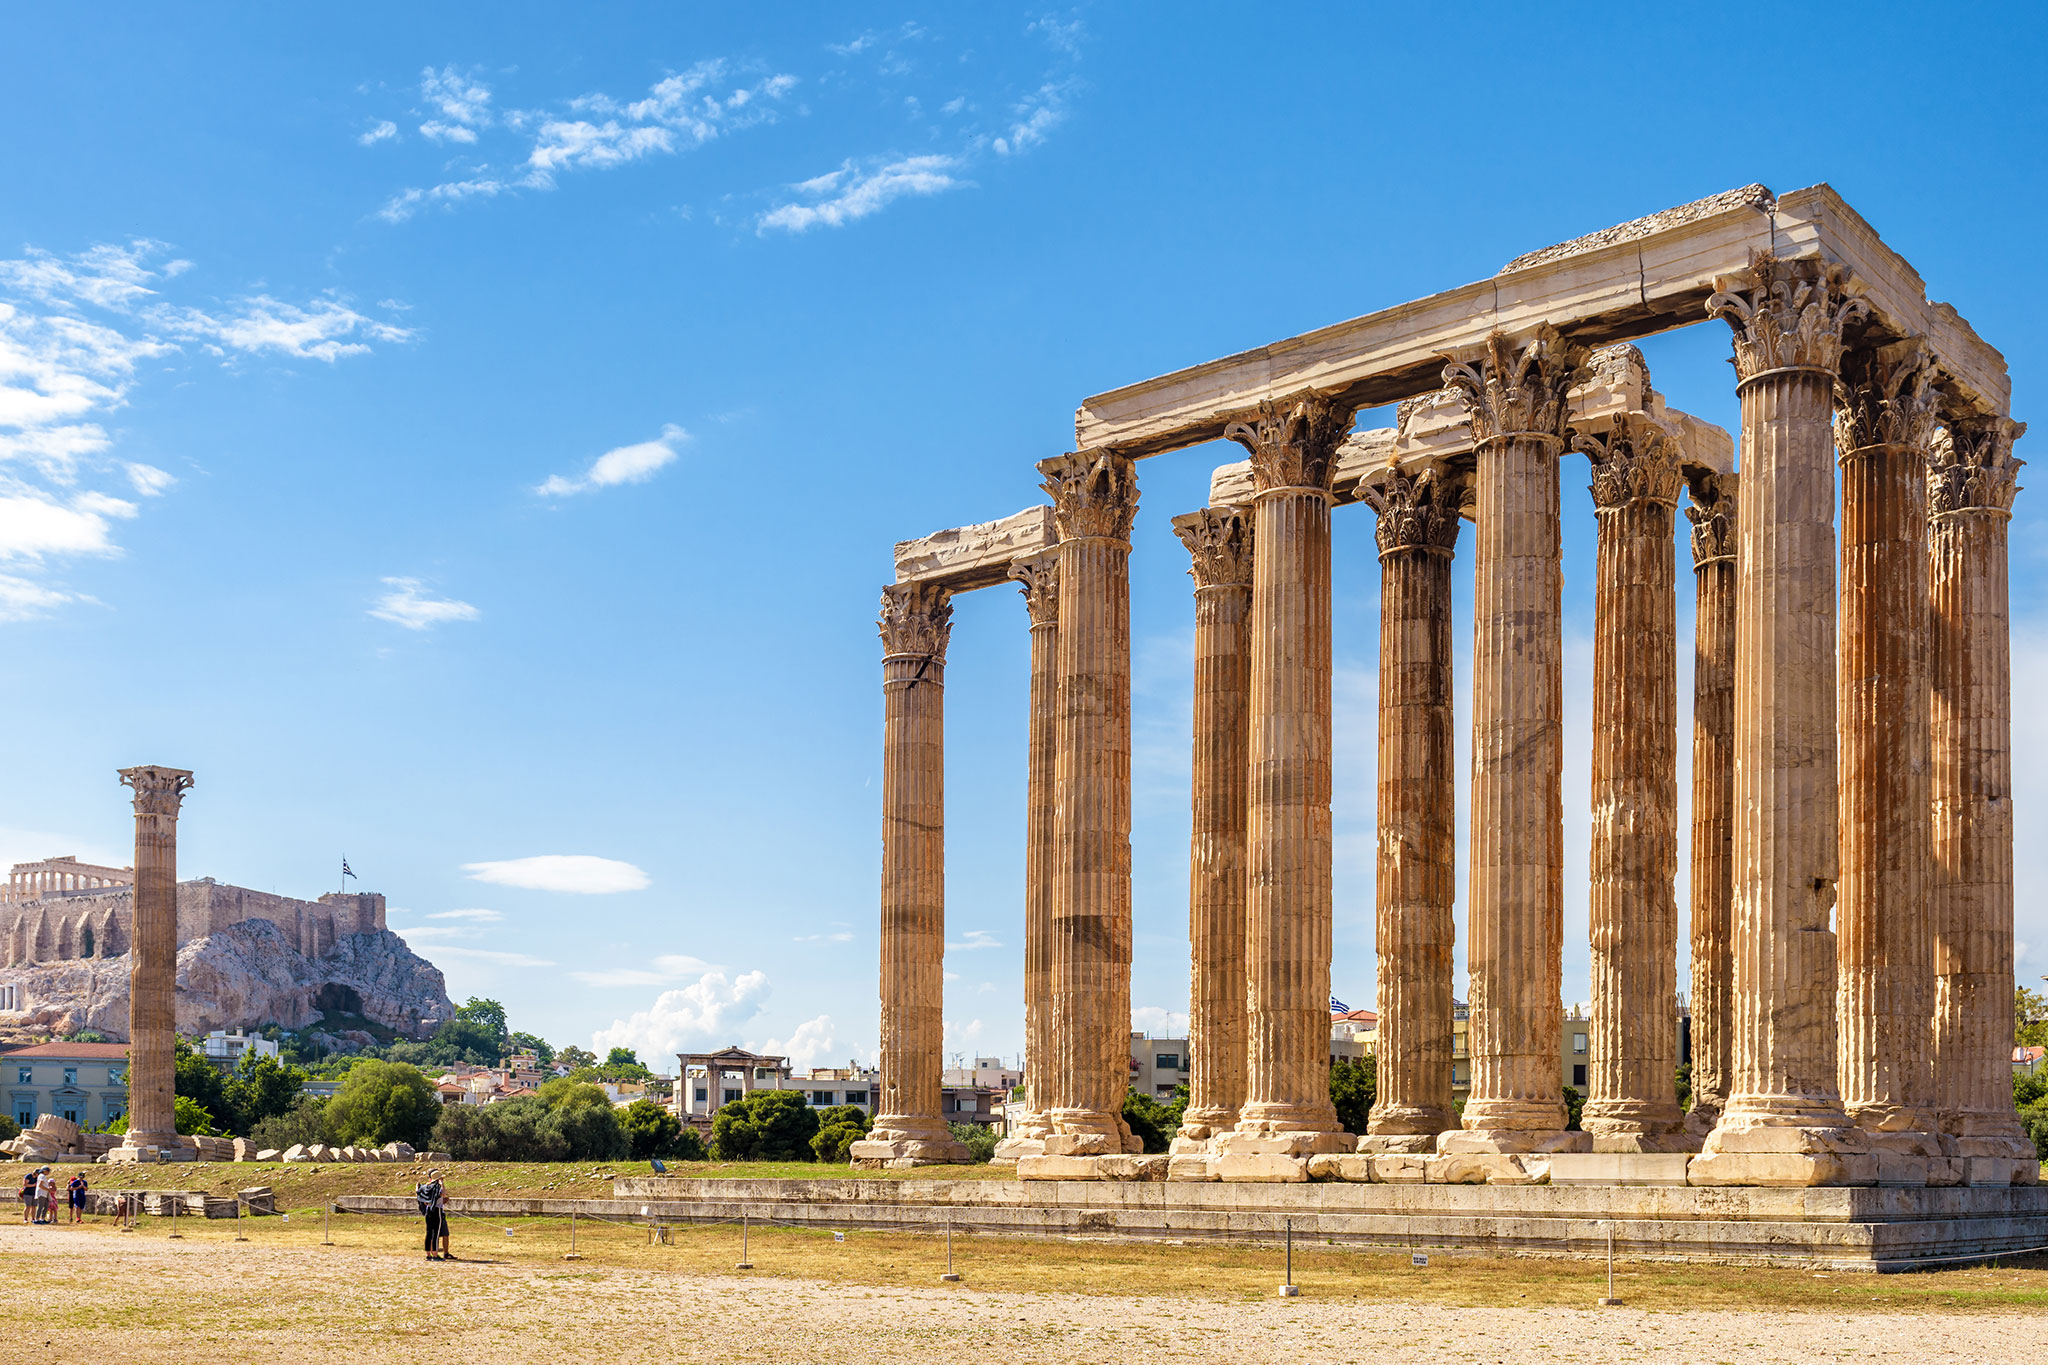 The ancient Greek Temple of Olympian Zeus, with its remaining Corinthian columns standing tall and the Acropolis visible on the hilltop in the distance under scattered clouds.